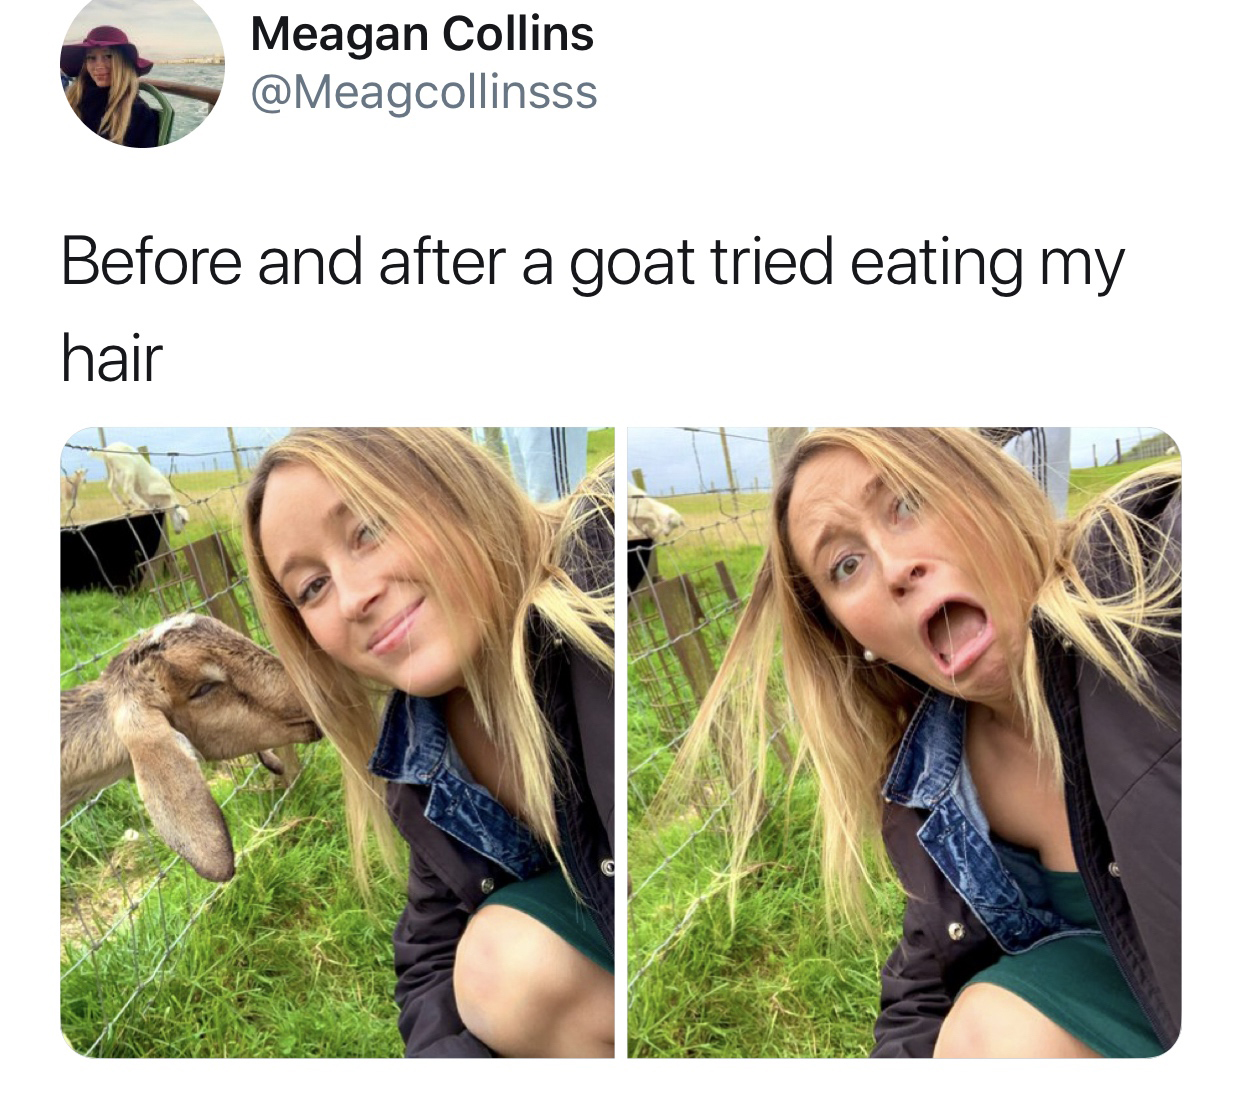 blond - Meagan Collins Before and after a goat tried eating my hair